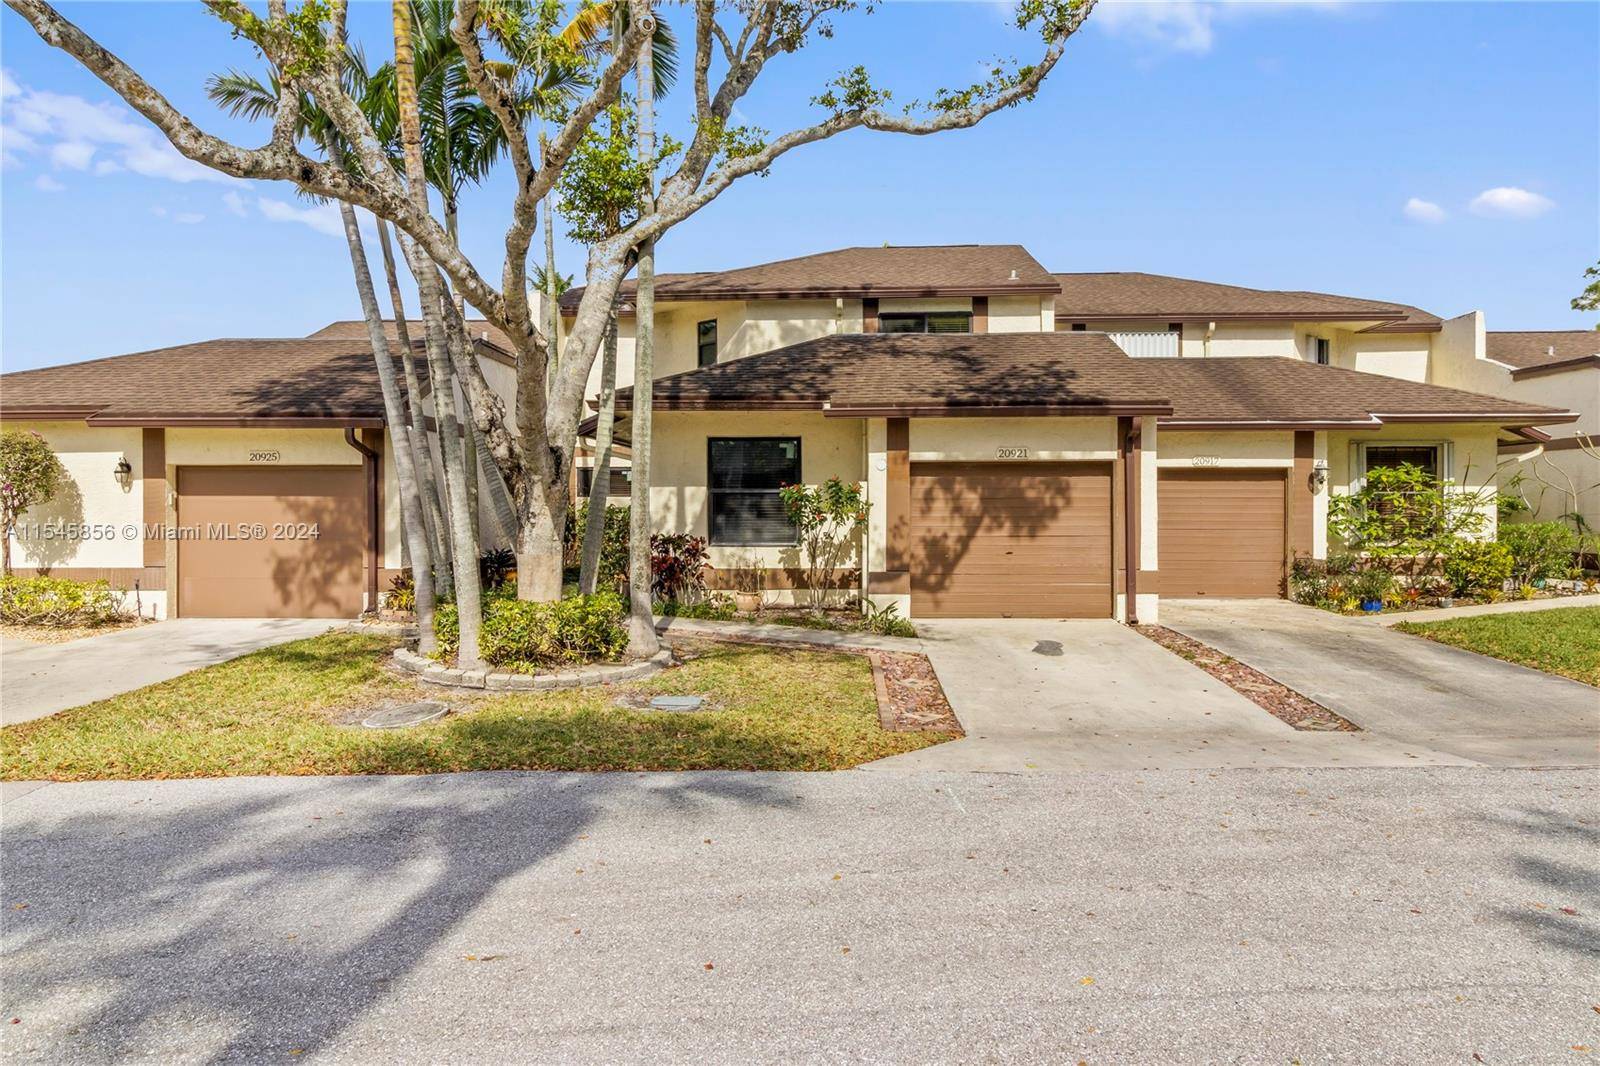 Welcome home to the highly sought after gated community of Boca Ridge Glen !